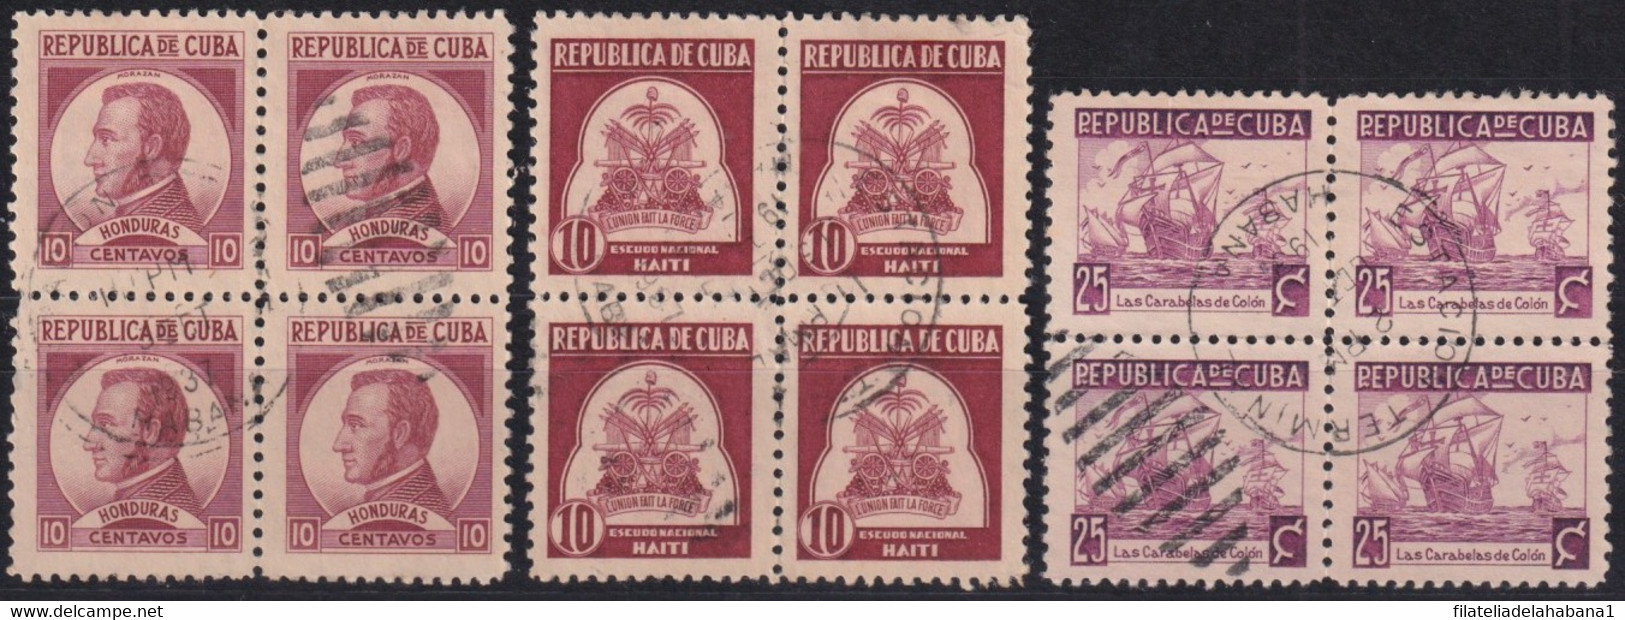 1937-442 CUBA REPUBLICA 1937 WRITTER & ARTIST CANCELLED BLOCK 4. - Used Stamps